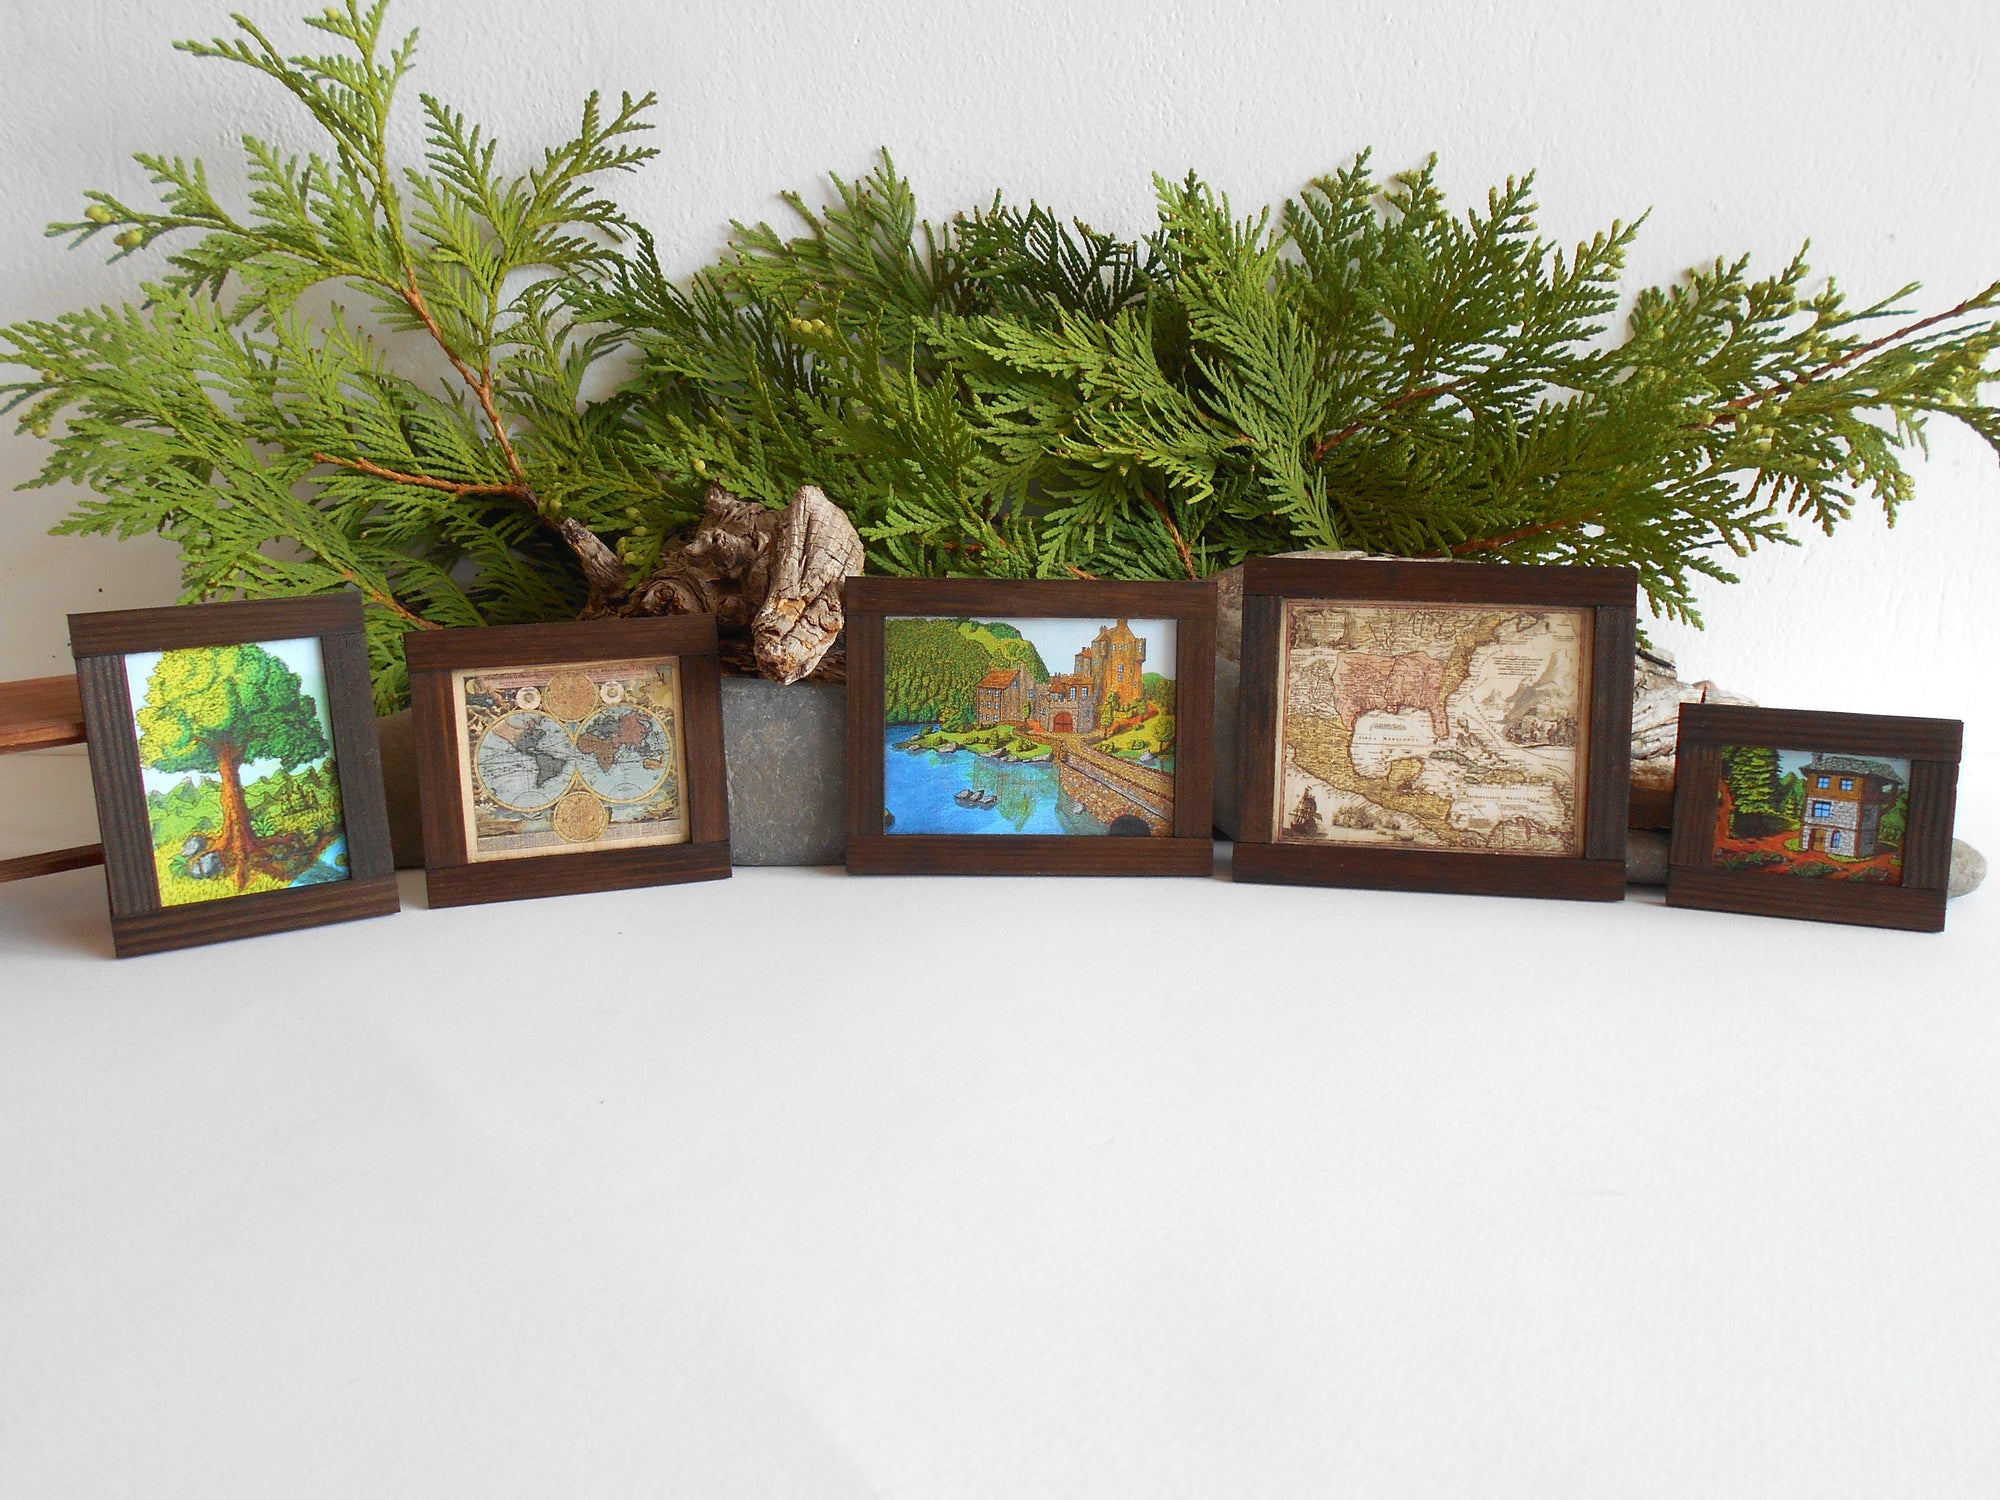 Handmade miniature dollhouse furniture wooden framed painting arts accessories for a dollhouse collectors from ExiArts eco-friendly company from Bulgaria.